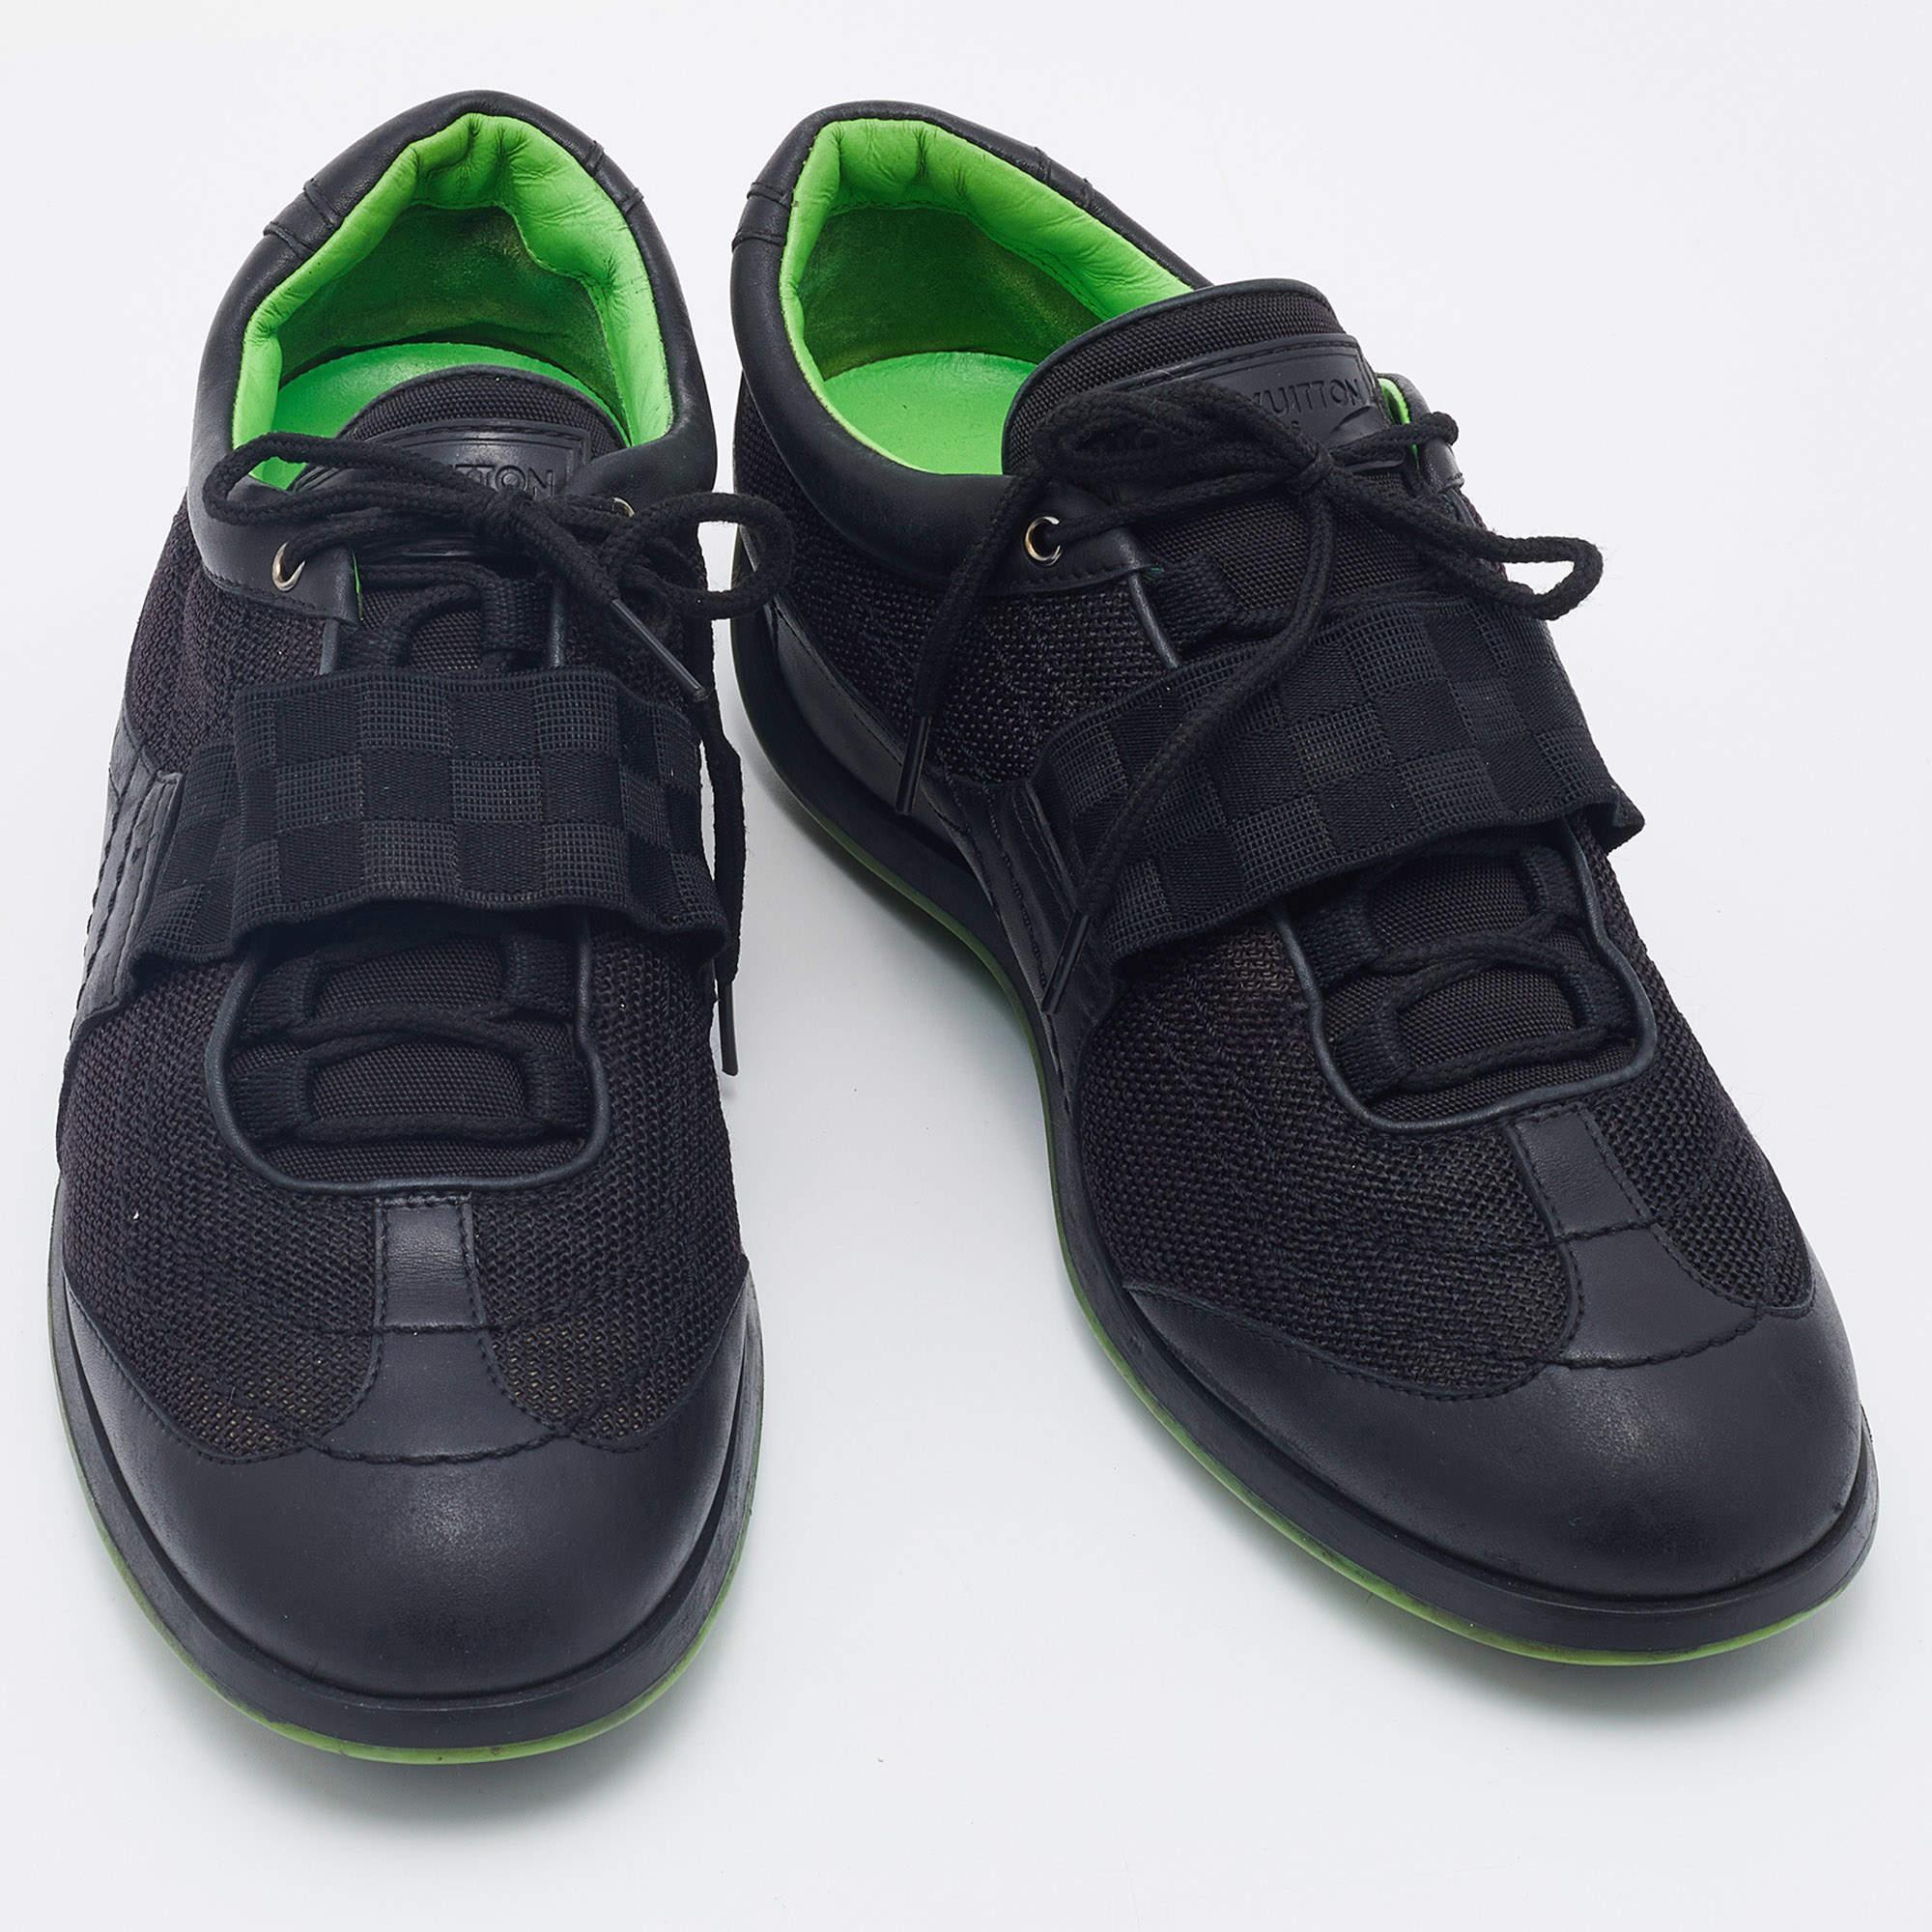 An everyday pair you're going to love is this one by Louis Vuitton. These sneakers are sewn in fabric & leather and detailed with green lining, lace-ups, and signature elements.

